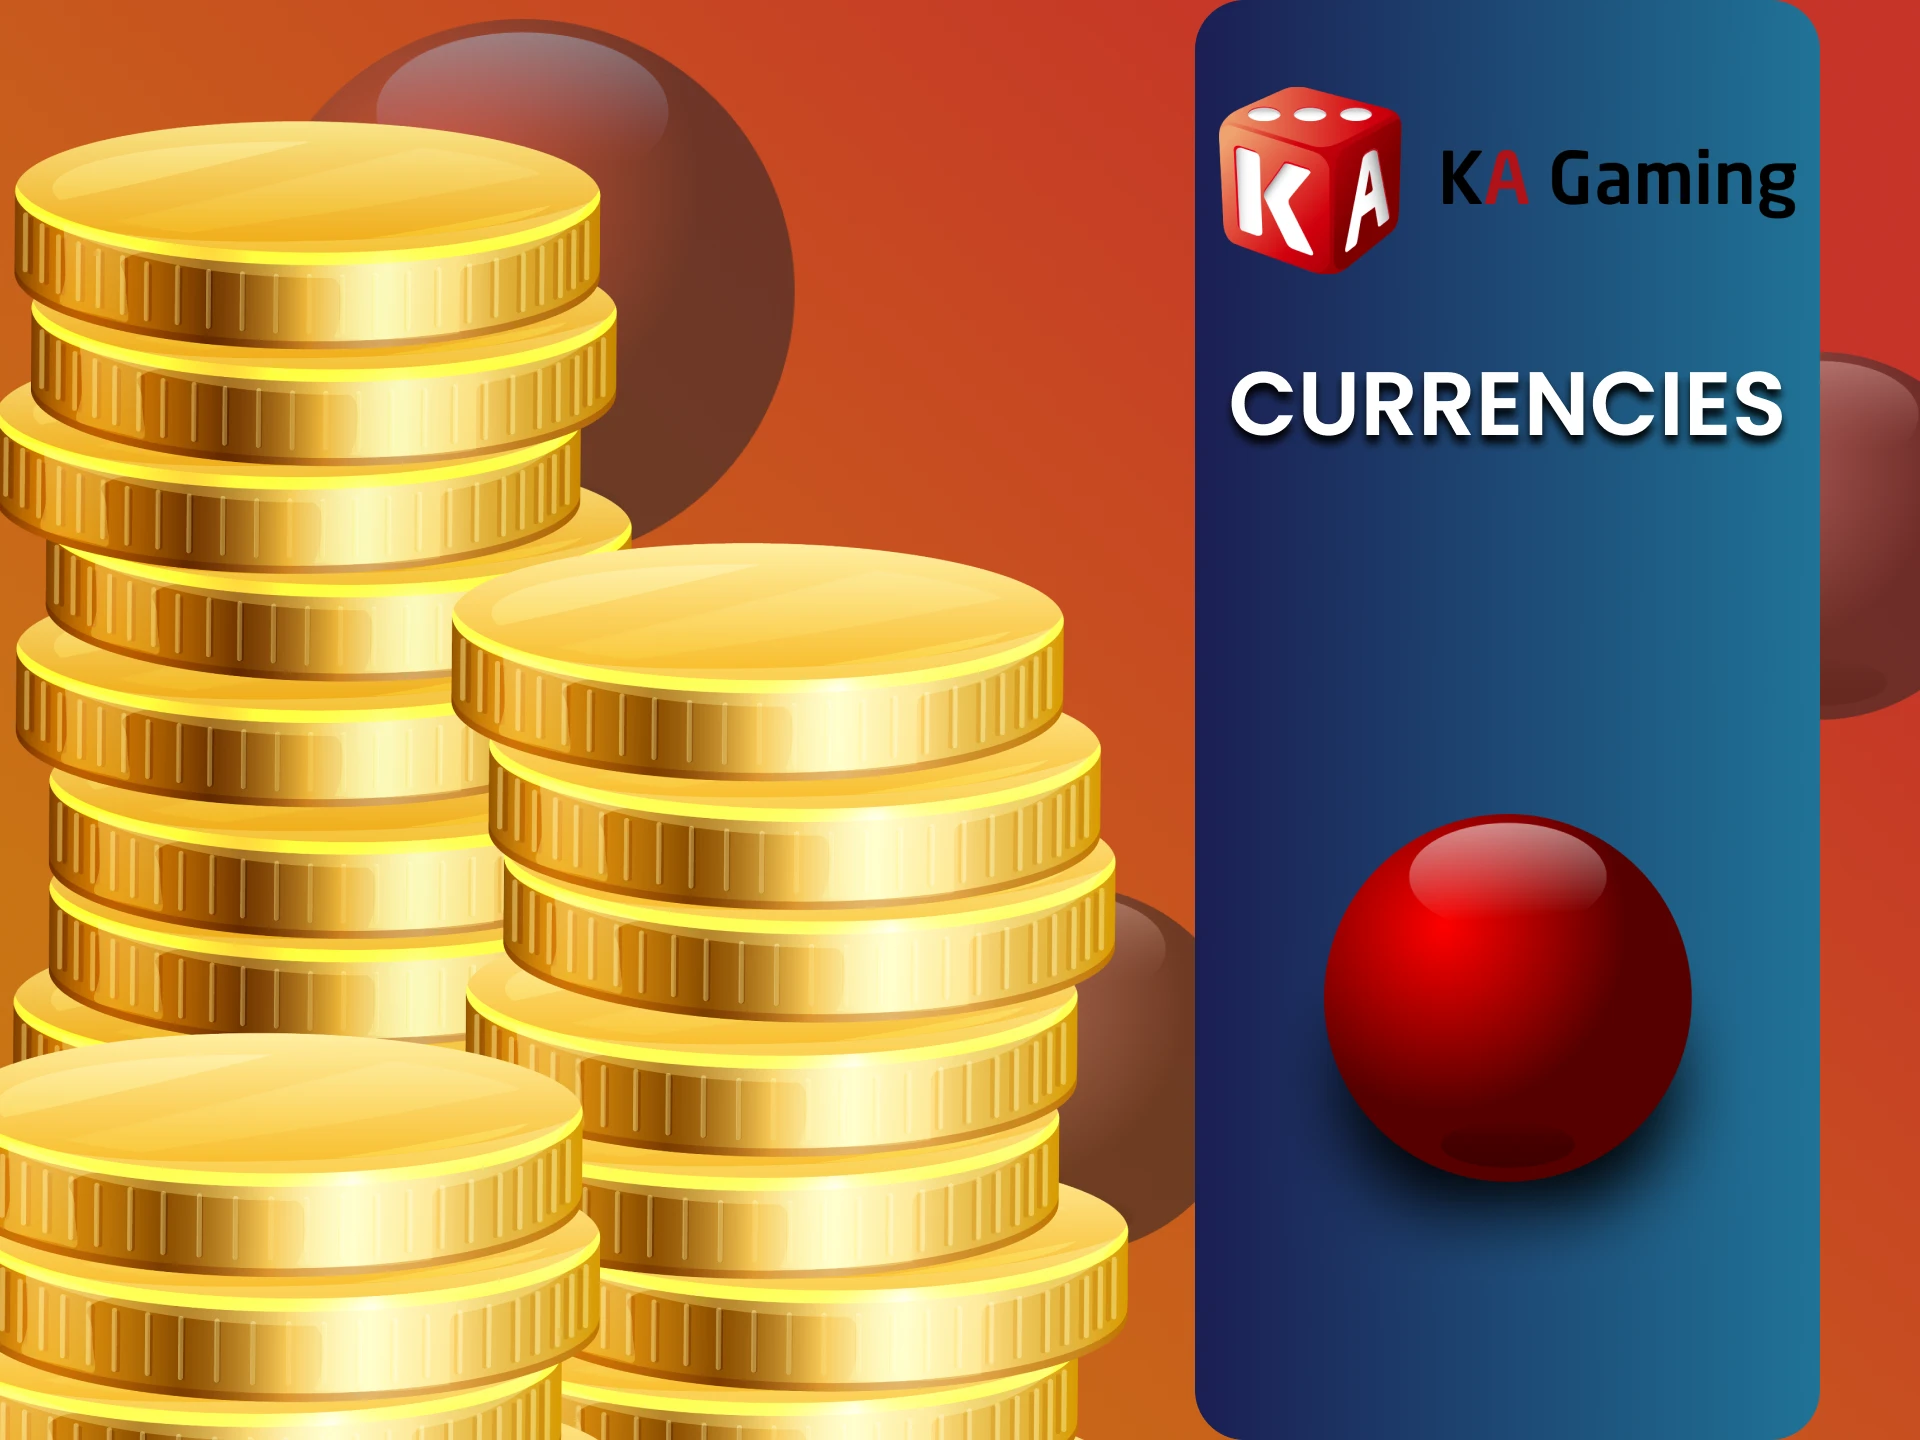 Learn about currencies in games from KA Gaming.